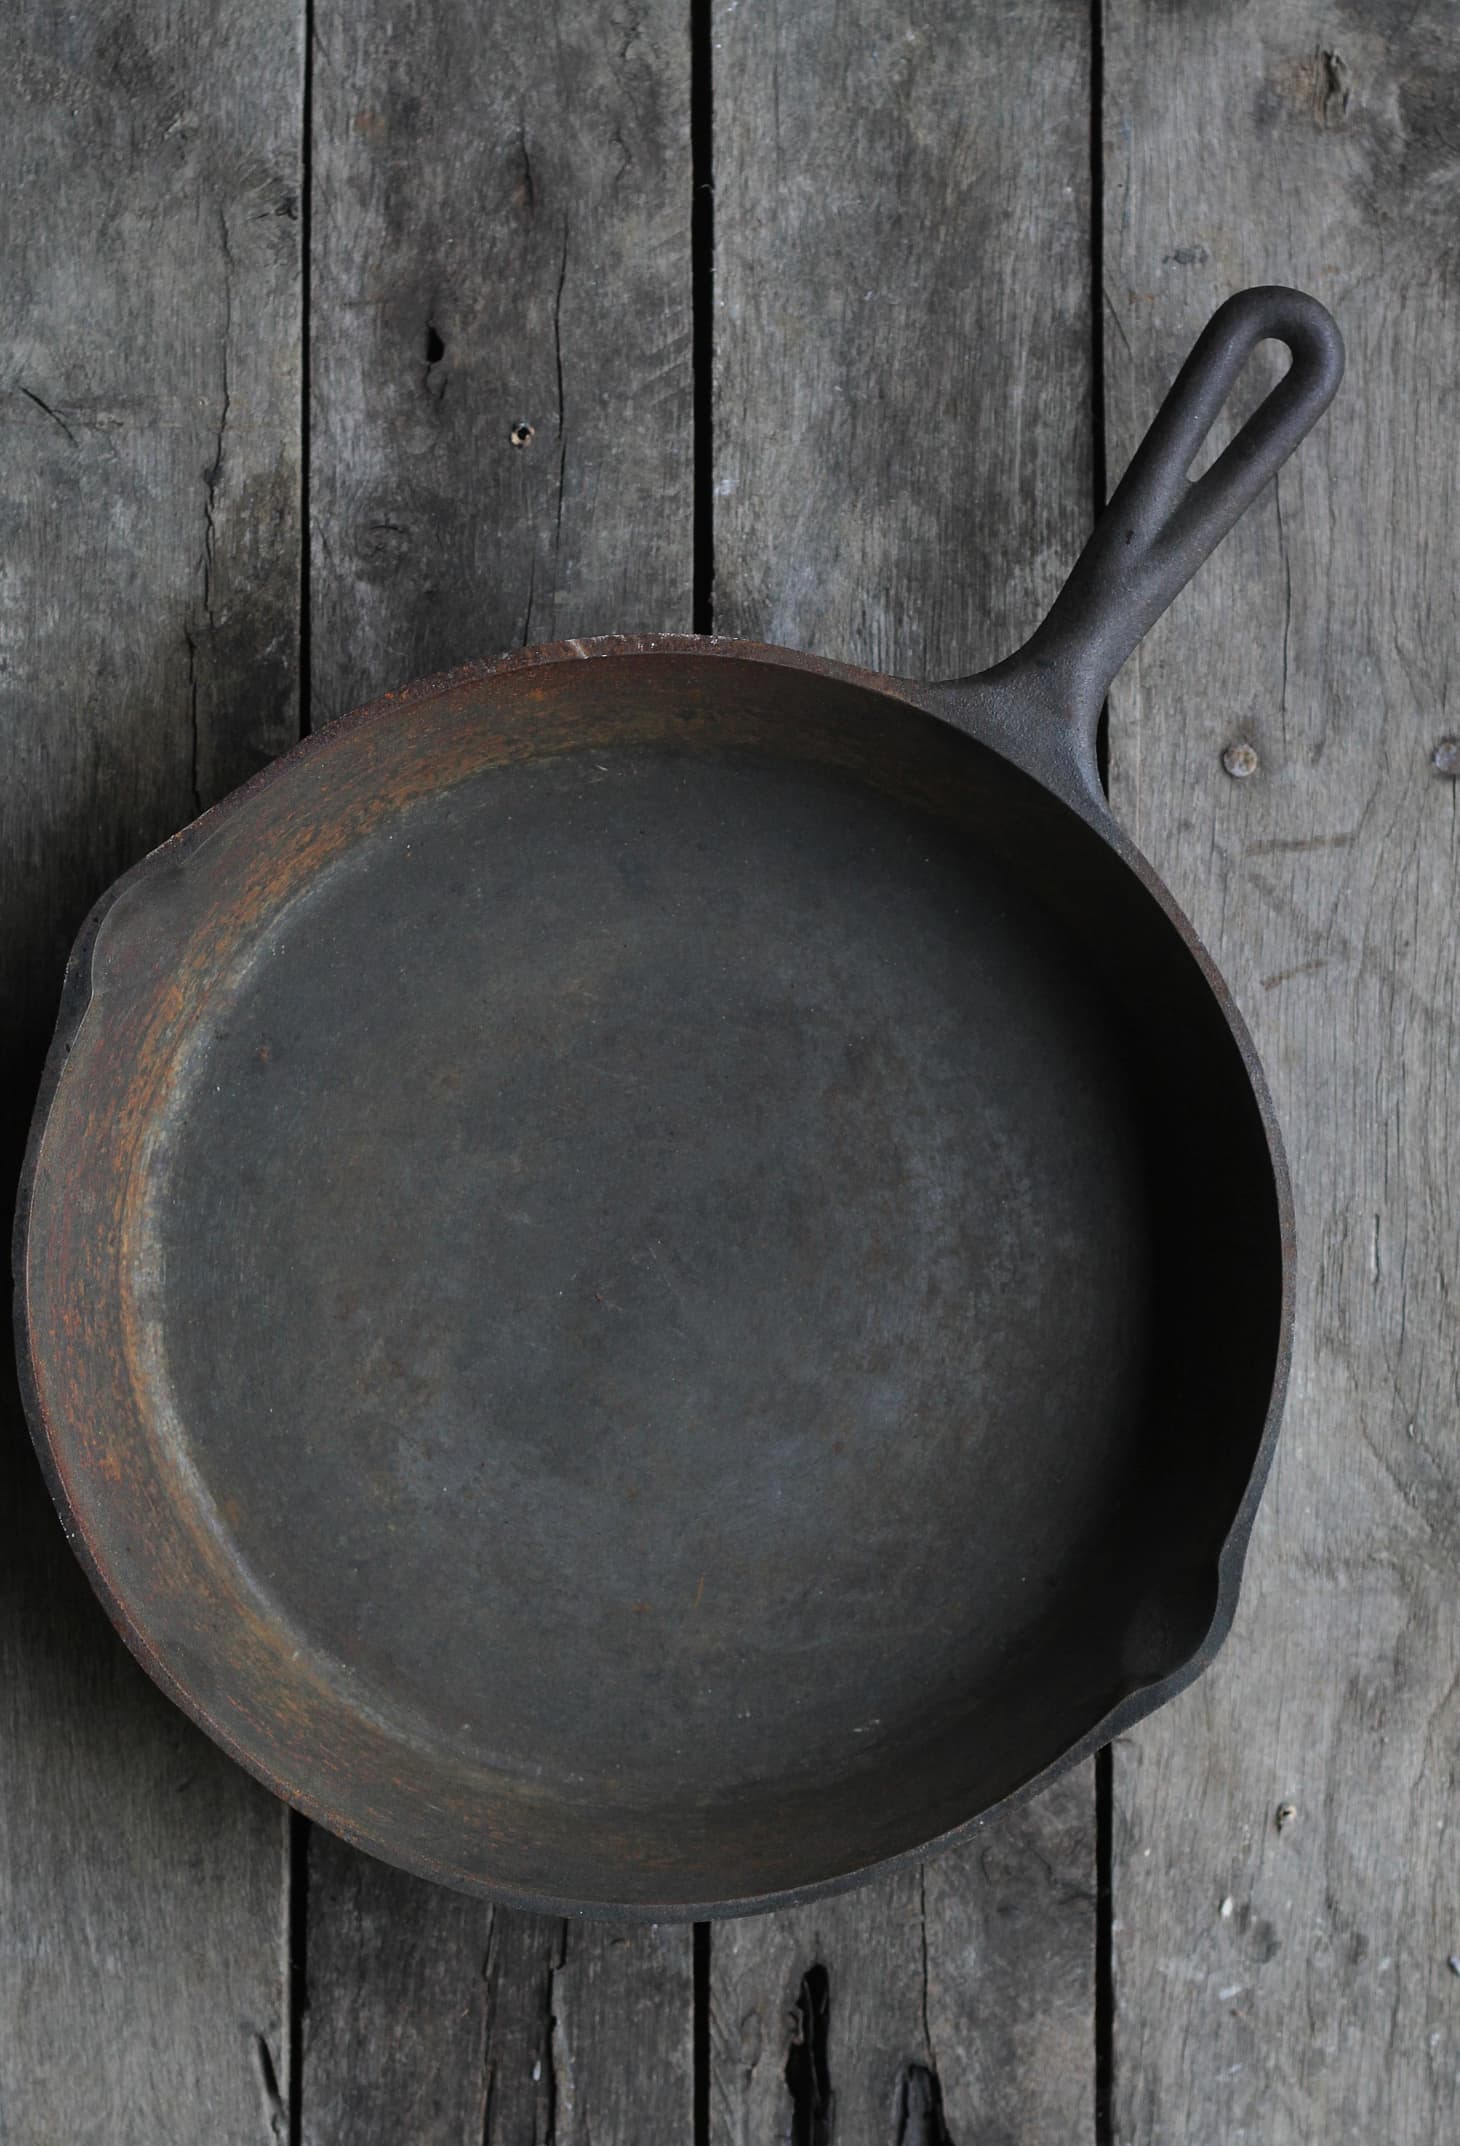 How to clean old, rusty cast iron pans with salt and oil simply - Photo 1.